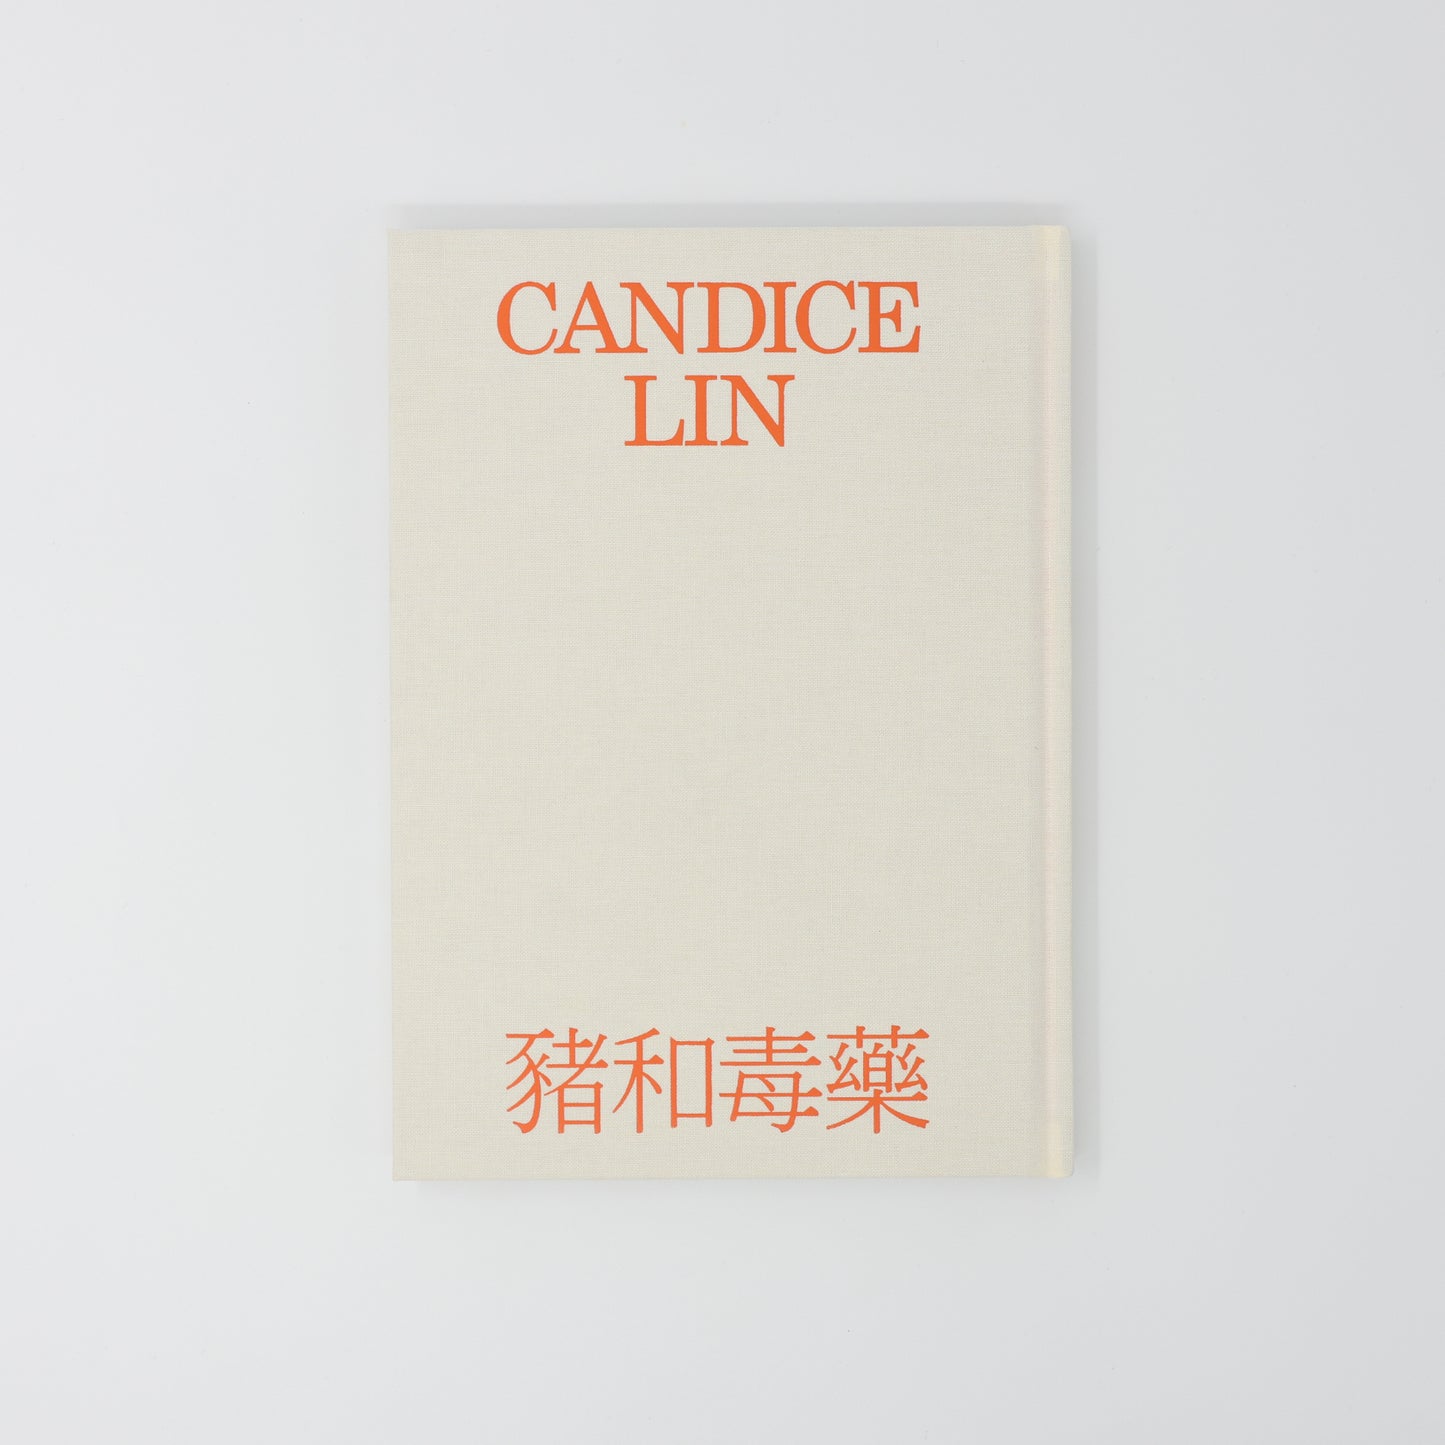 Candice Lin: Pigs and Poison